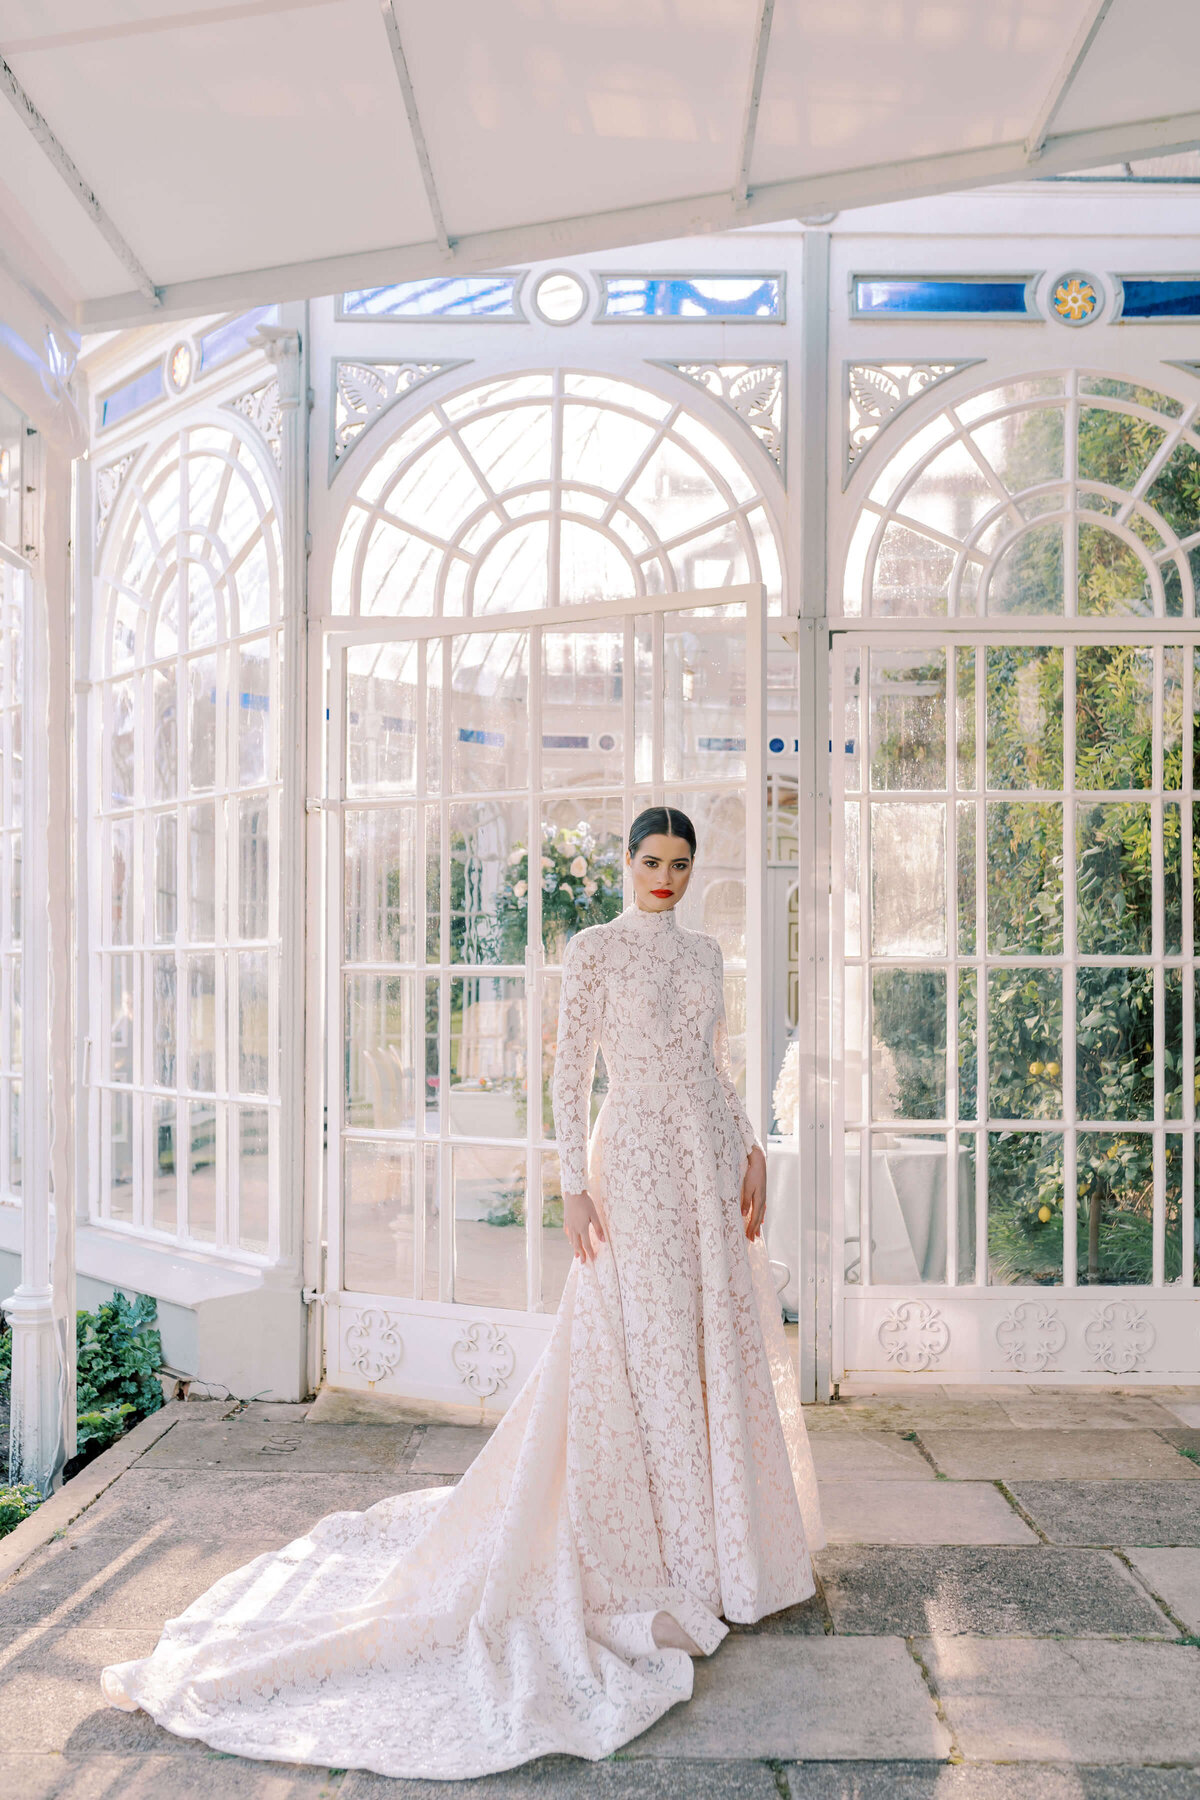 orangery glasshouse at luxury wedding venue avington park with a bride in a lace white dress standing in front of it to pose during golden hour